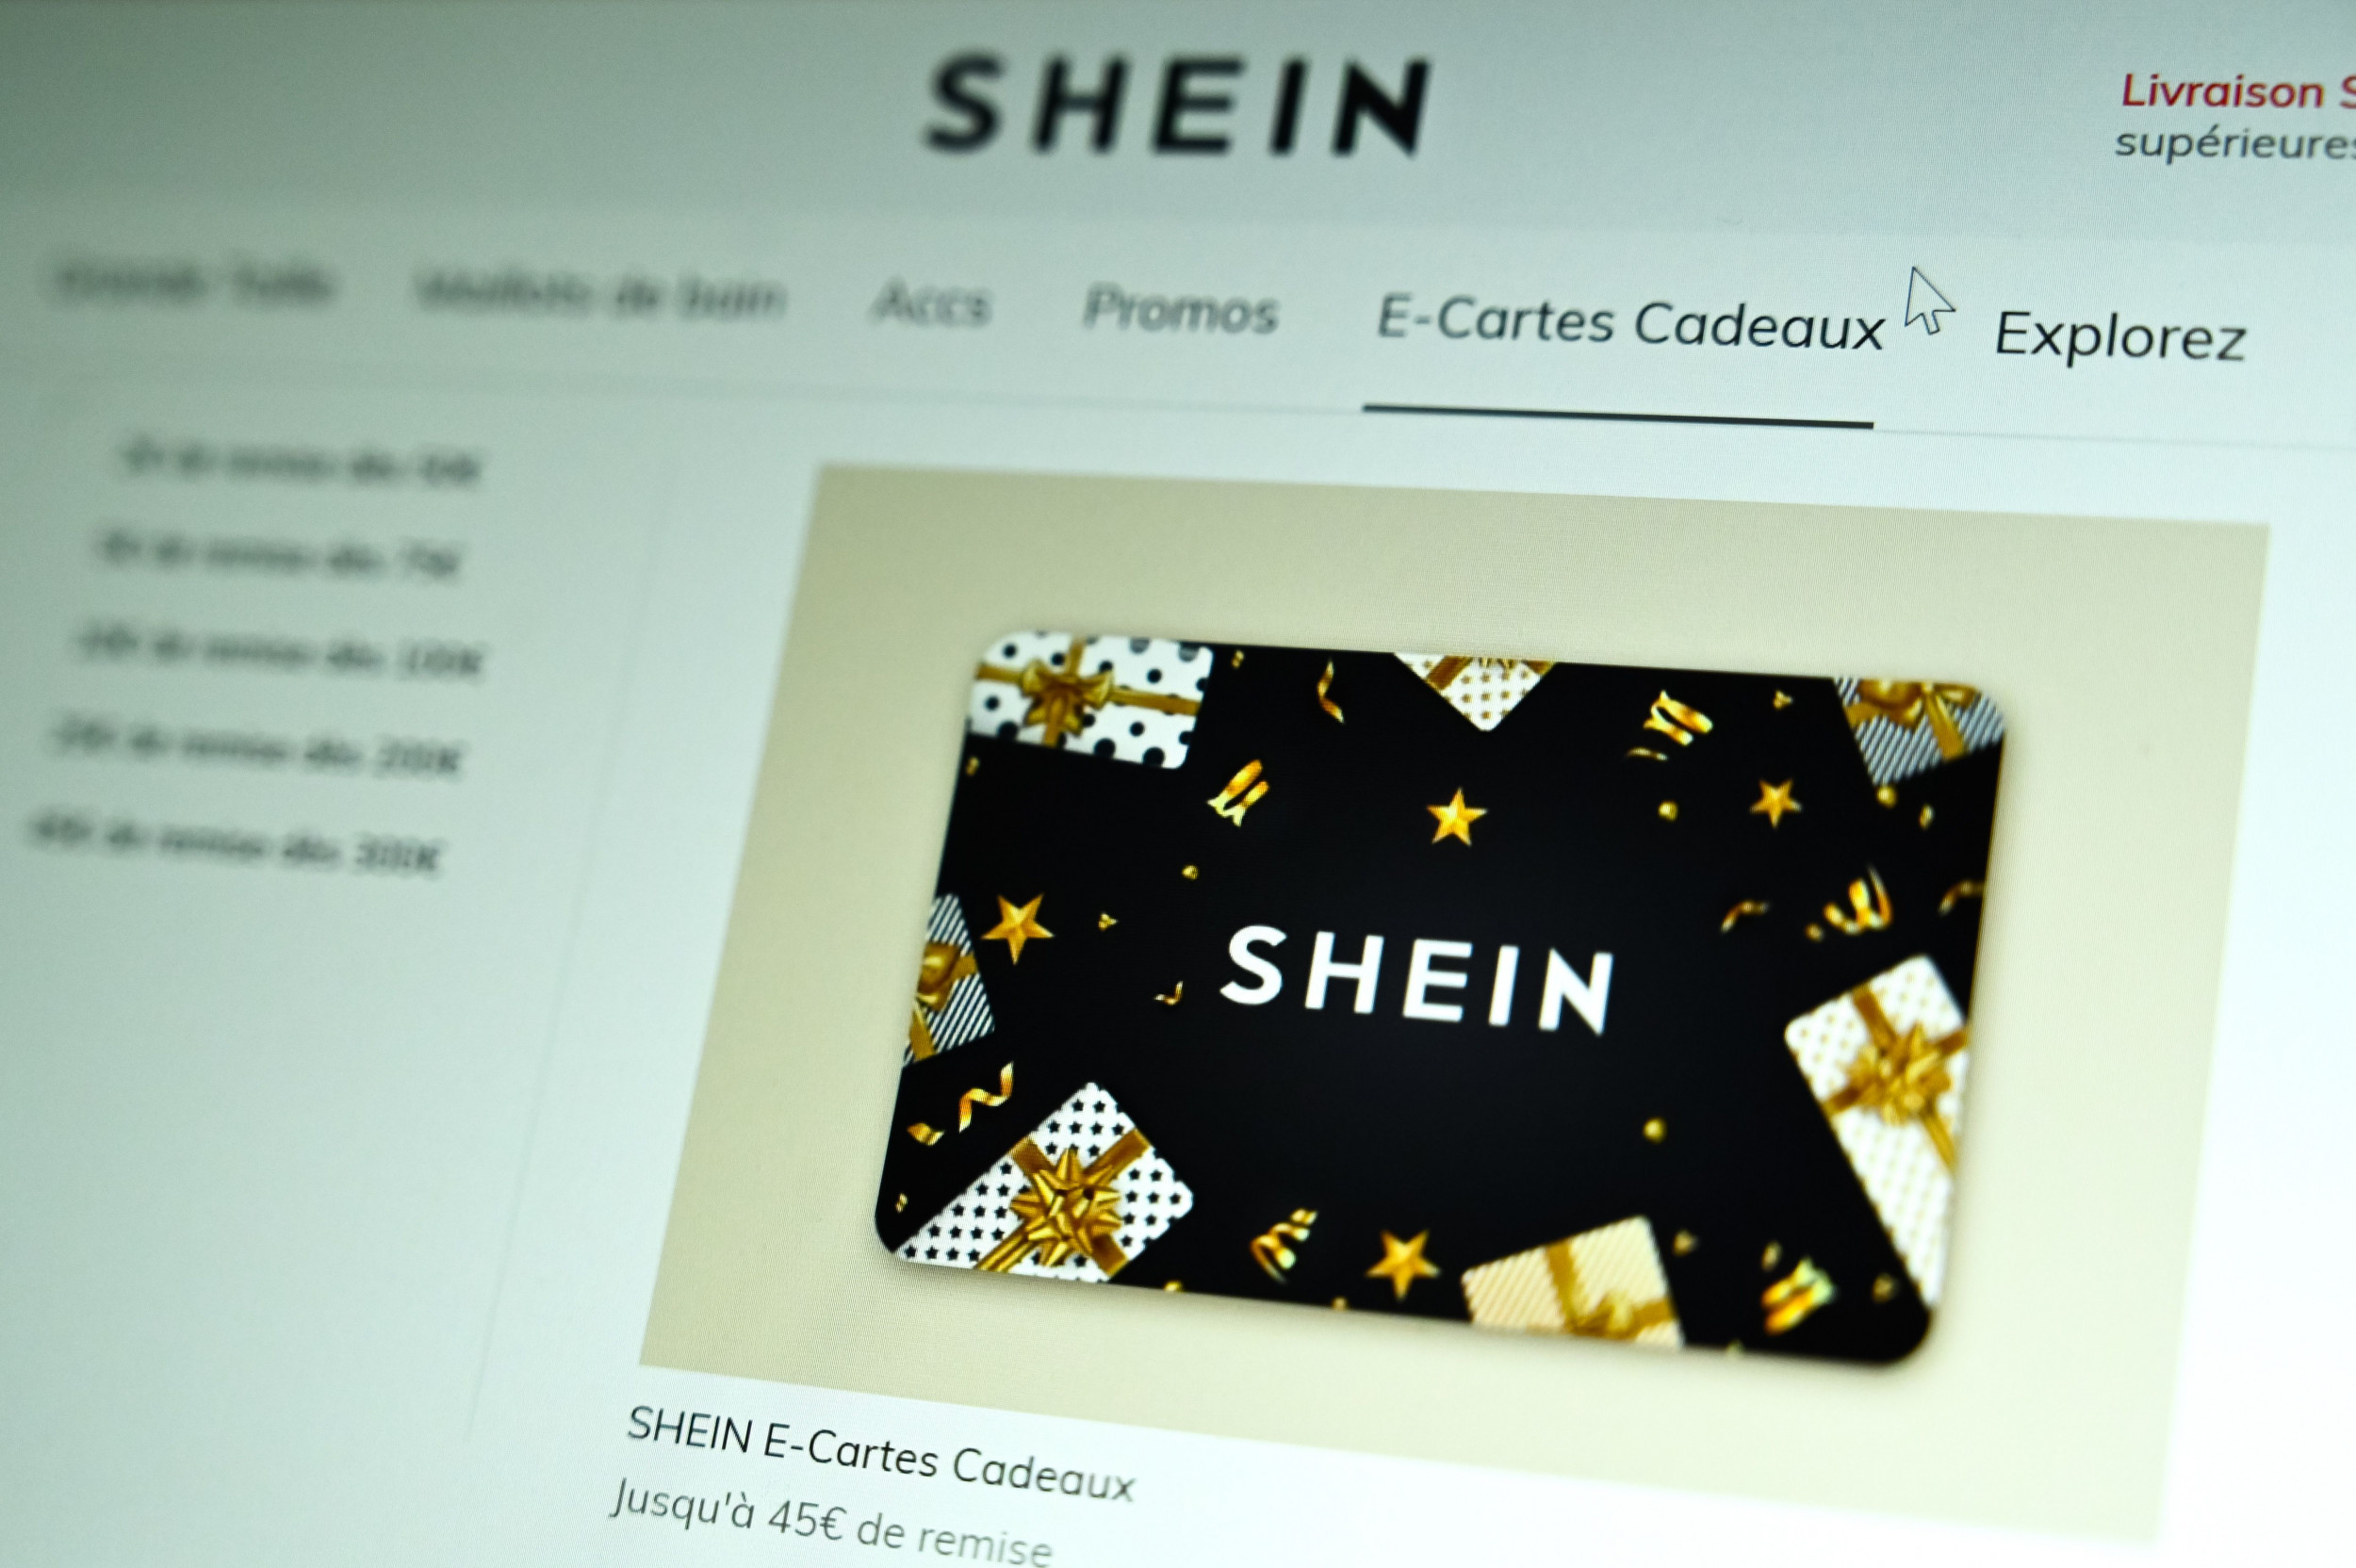 Woman Says SHEIN Product Sent Her to Urgent Care With 'Chemical Poisoning'